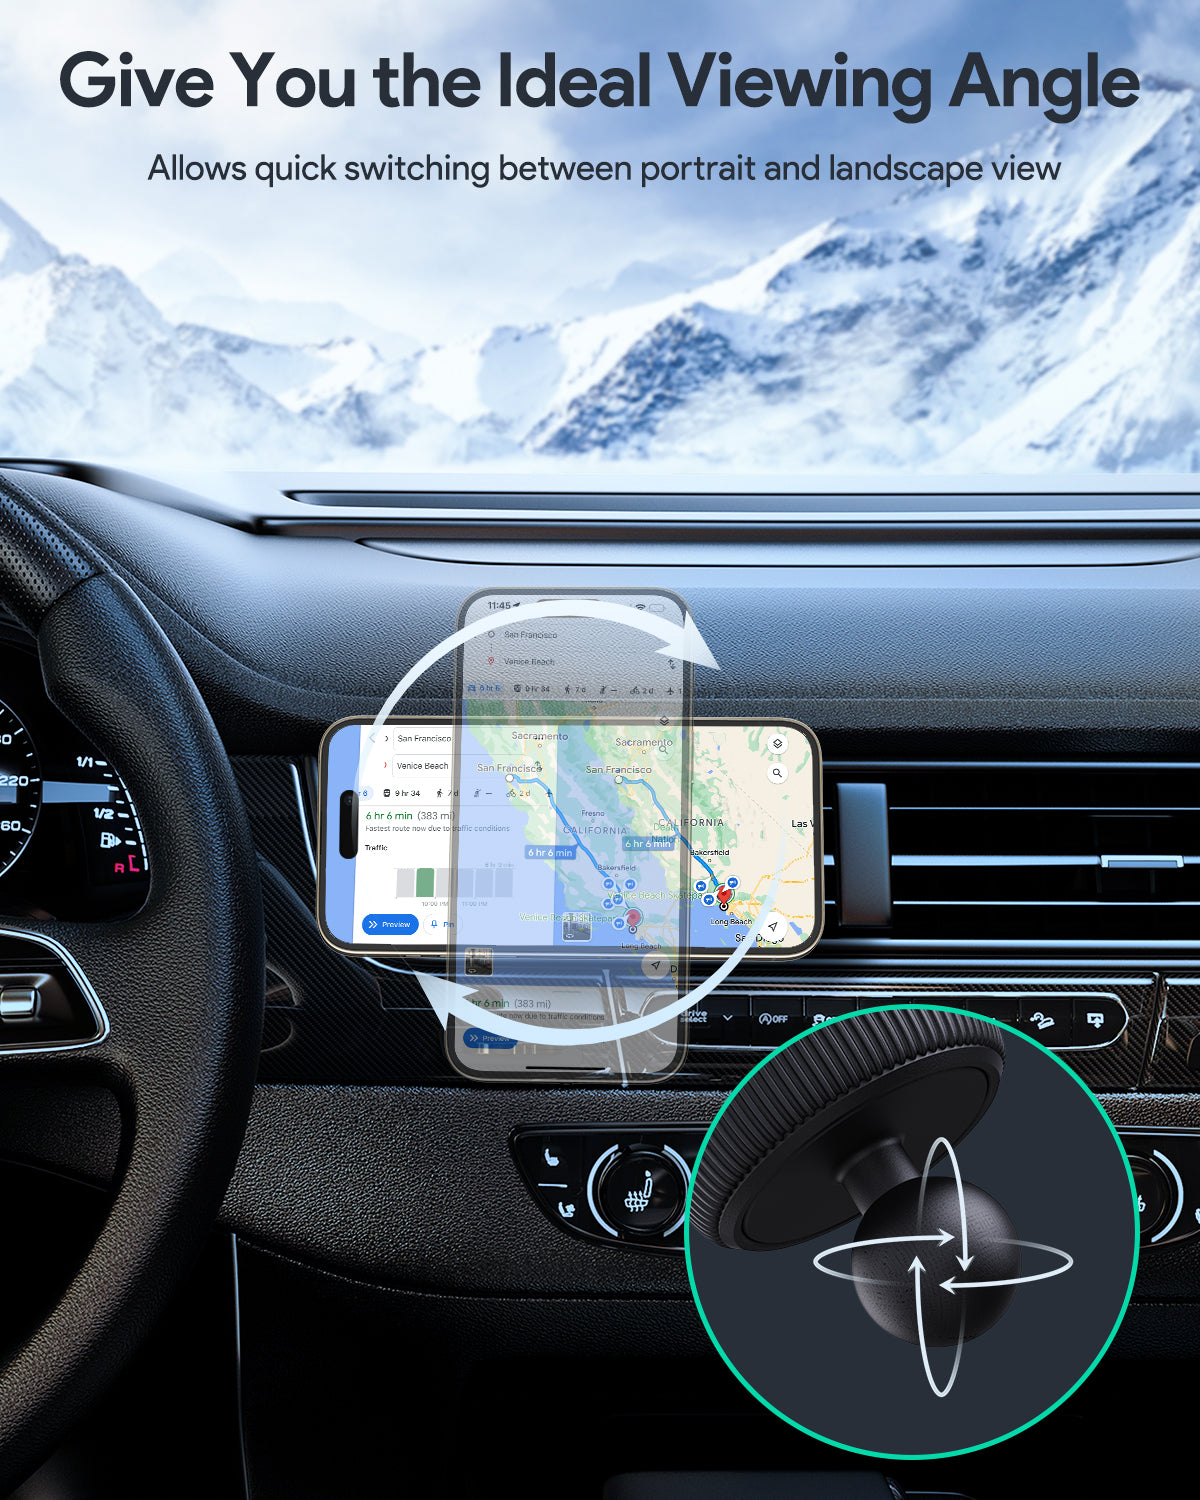 AUKEY HD-MC13 MagFusion Dash Qi2 Magnetic Fast Wireless Charging Phone Mount